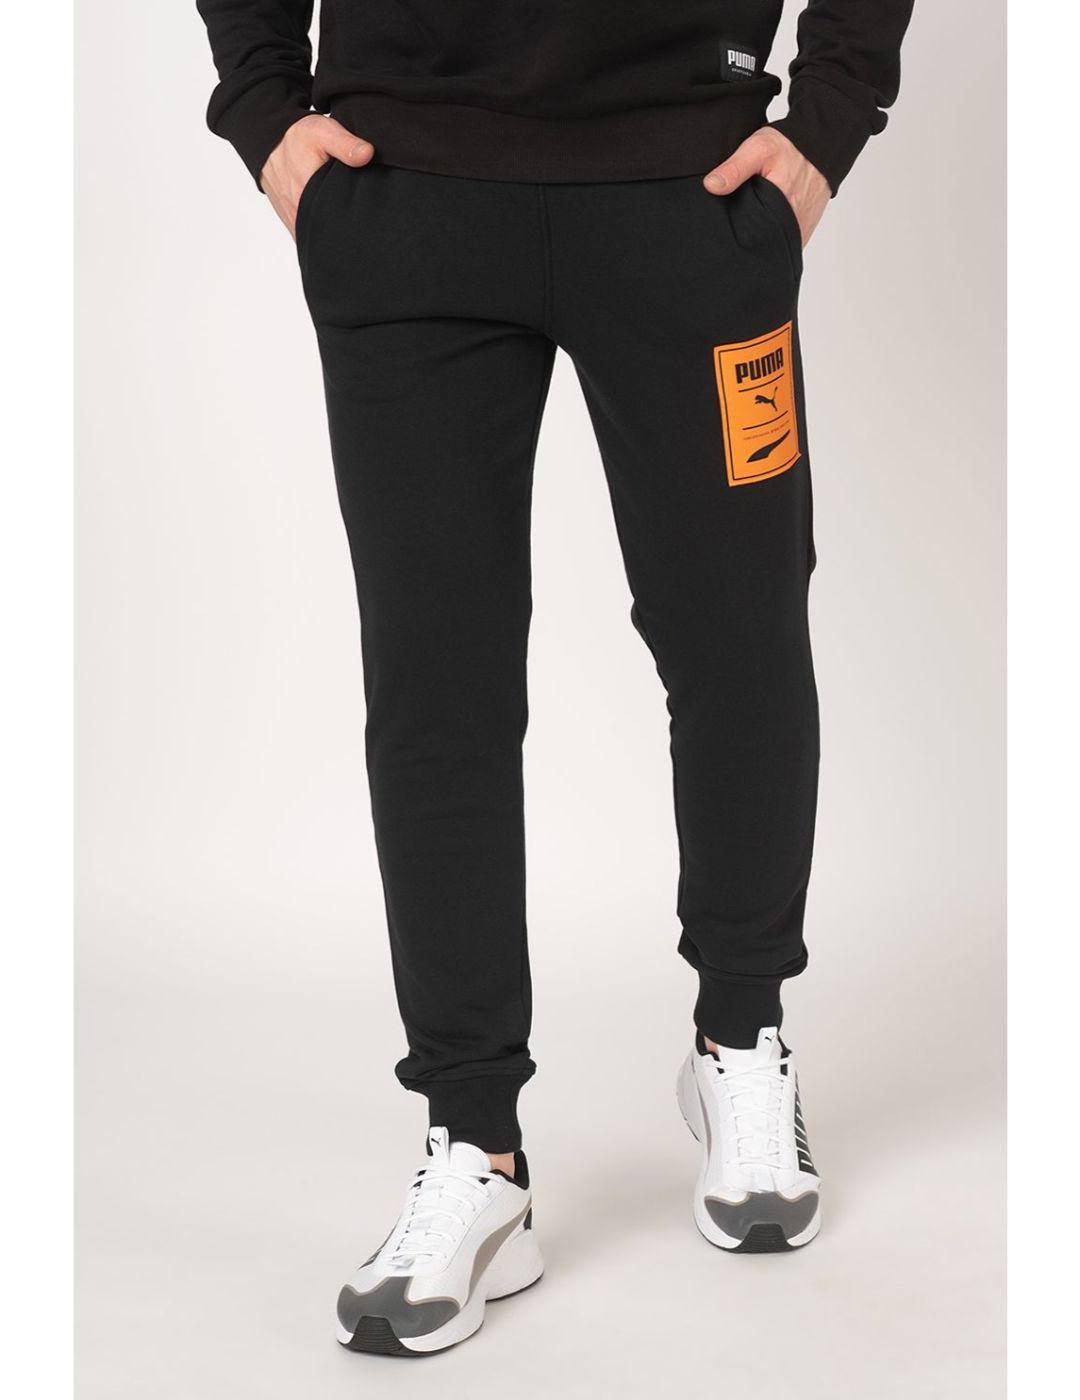 RECHECK PACK GRAPHIC PANT-W